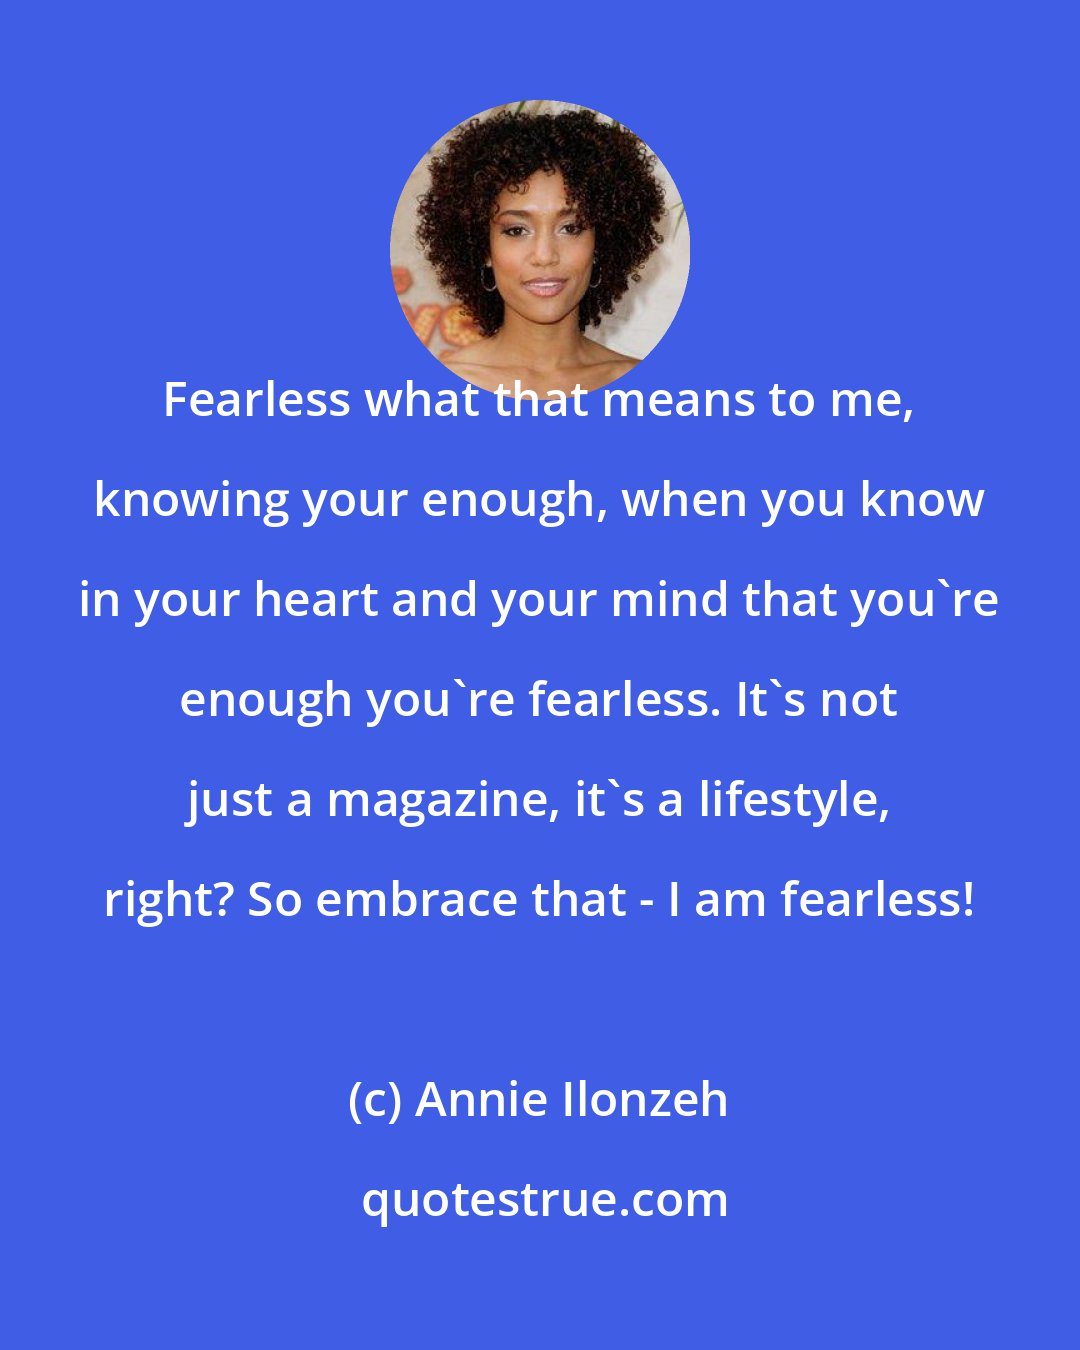 Annie Ilonzeh: Fearless what that means to me, knowing your enough, when you know in your heart and your mind that you're enough you're fearless. It's not just a magazine, it's a lifestyle, right? So embrace that - I am fearless!